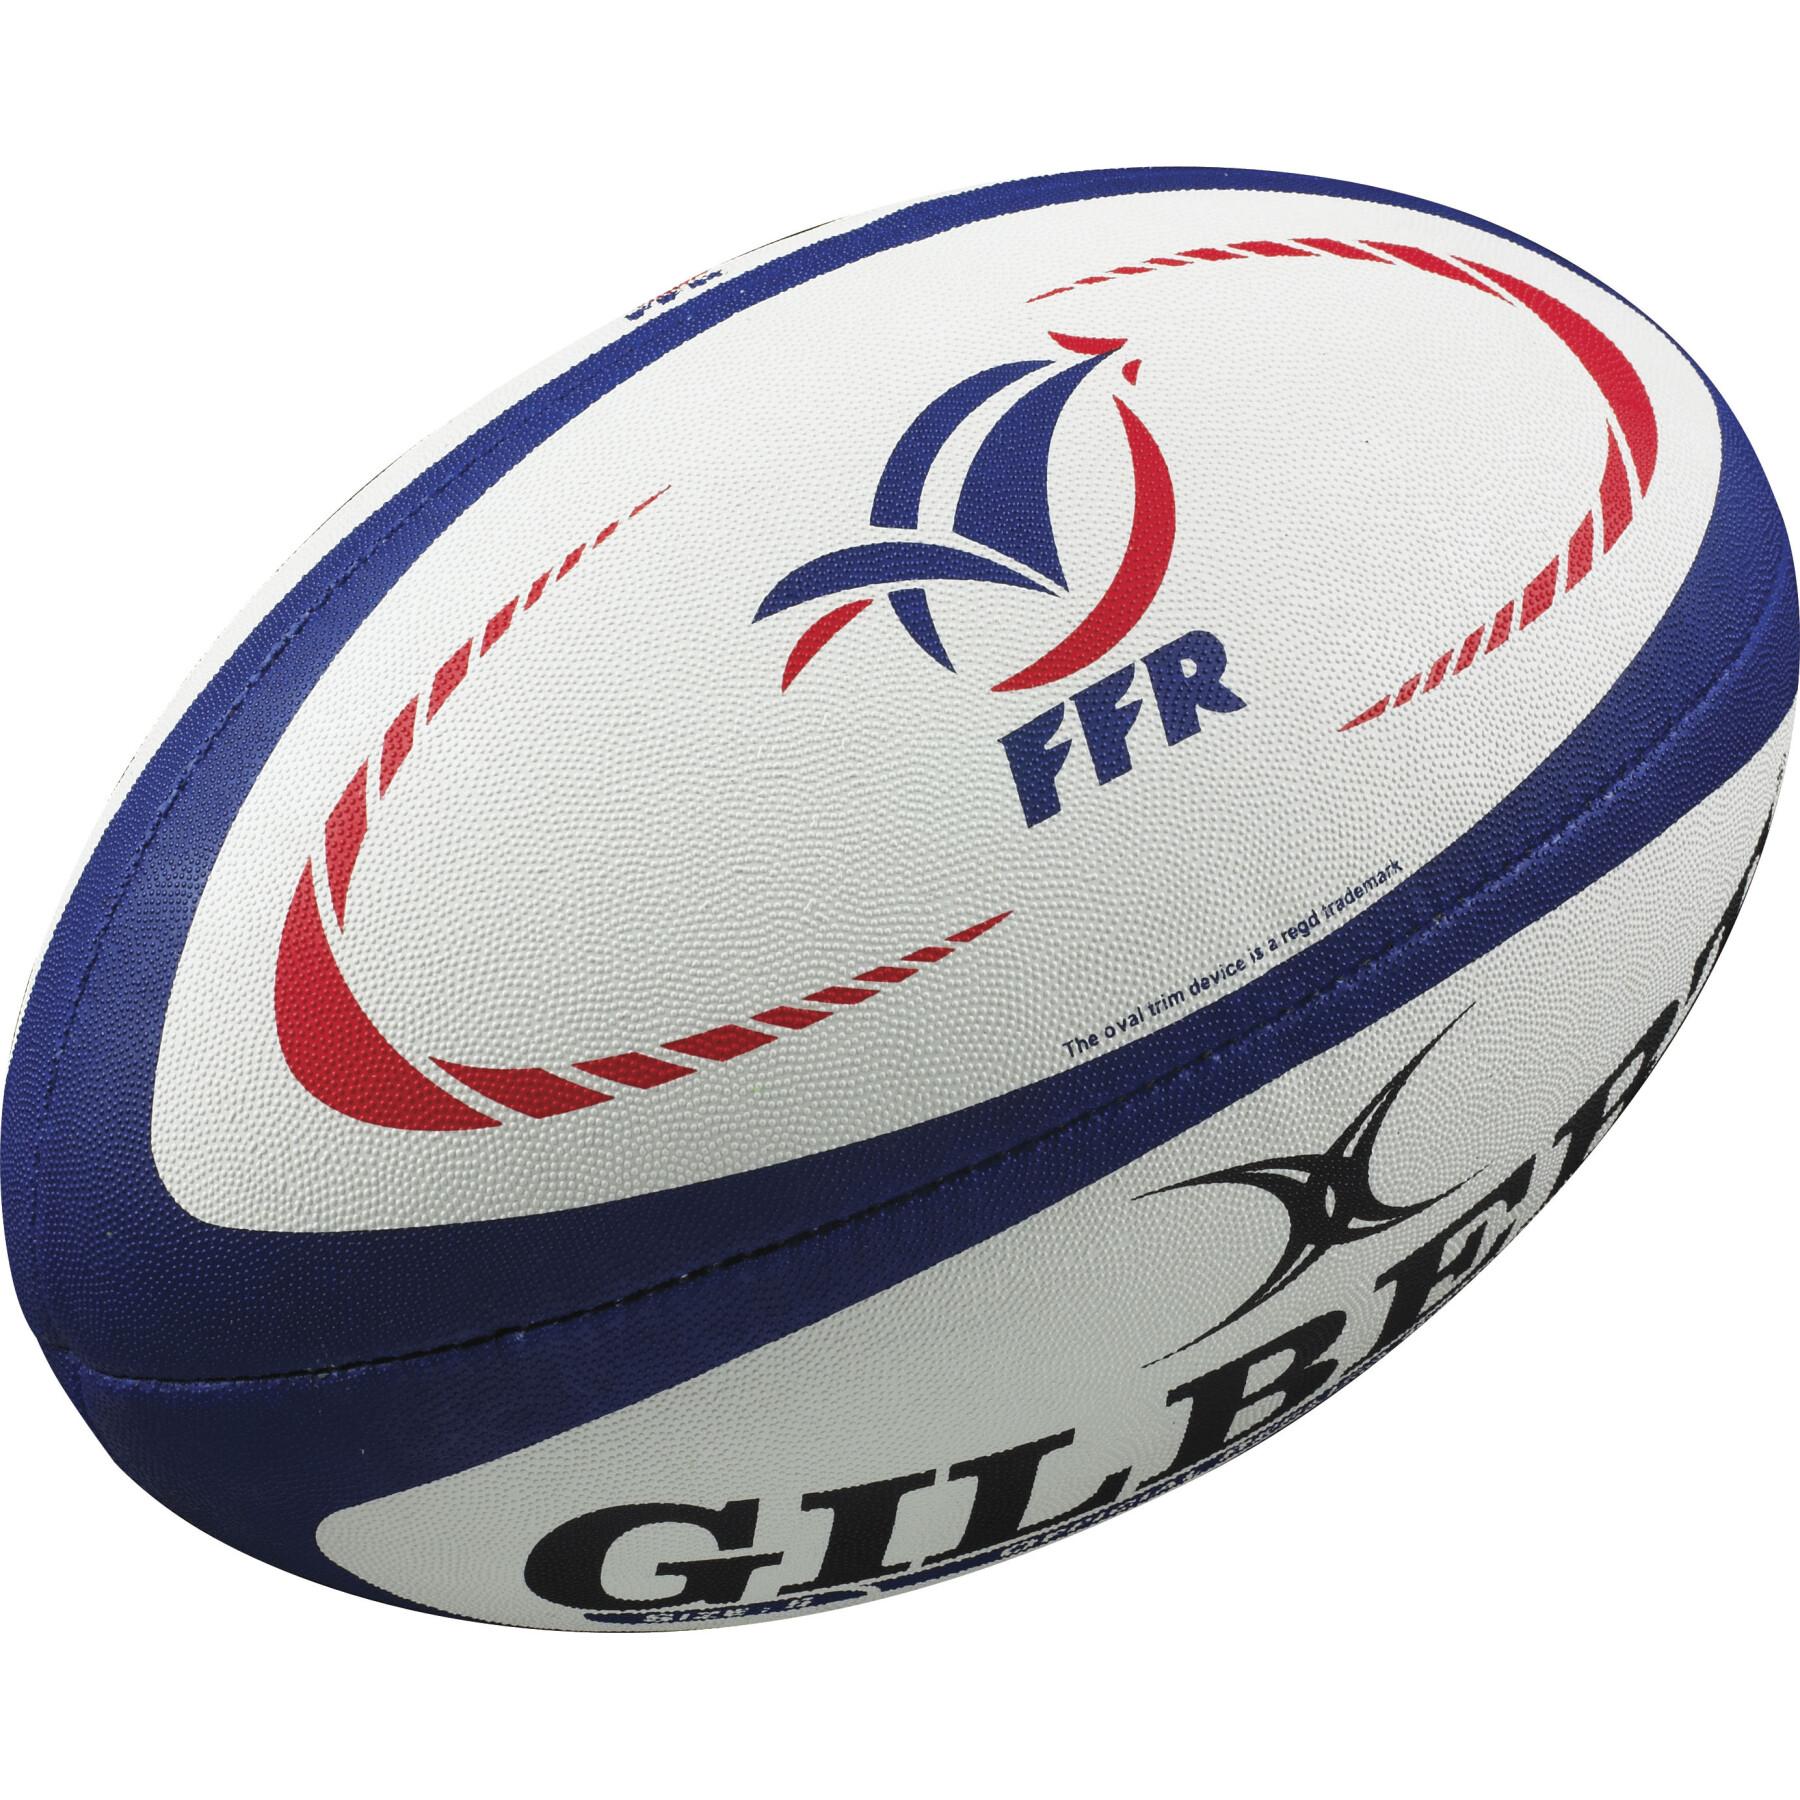 Rugby ball France